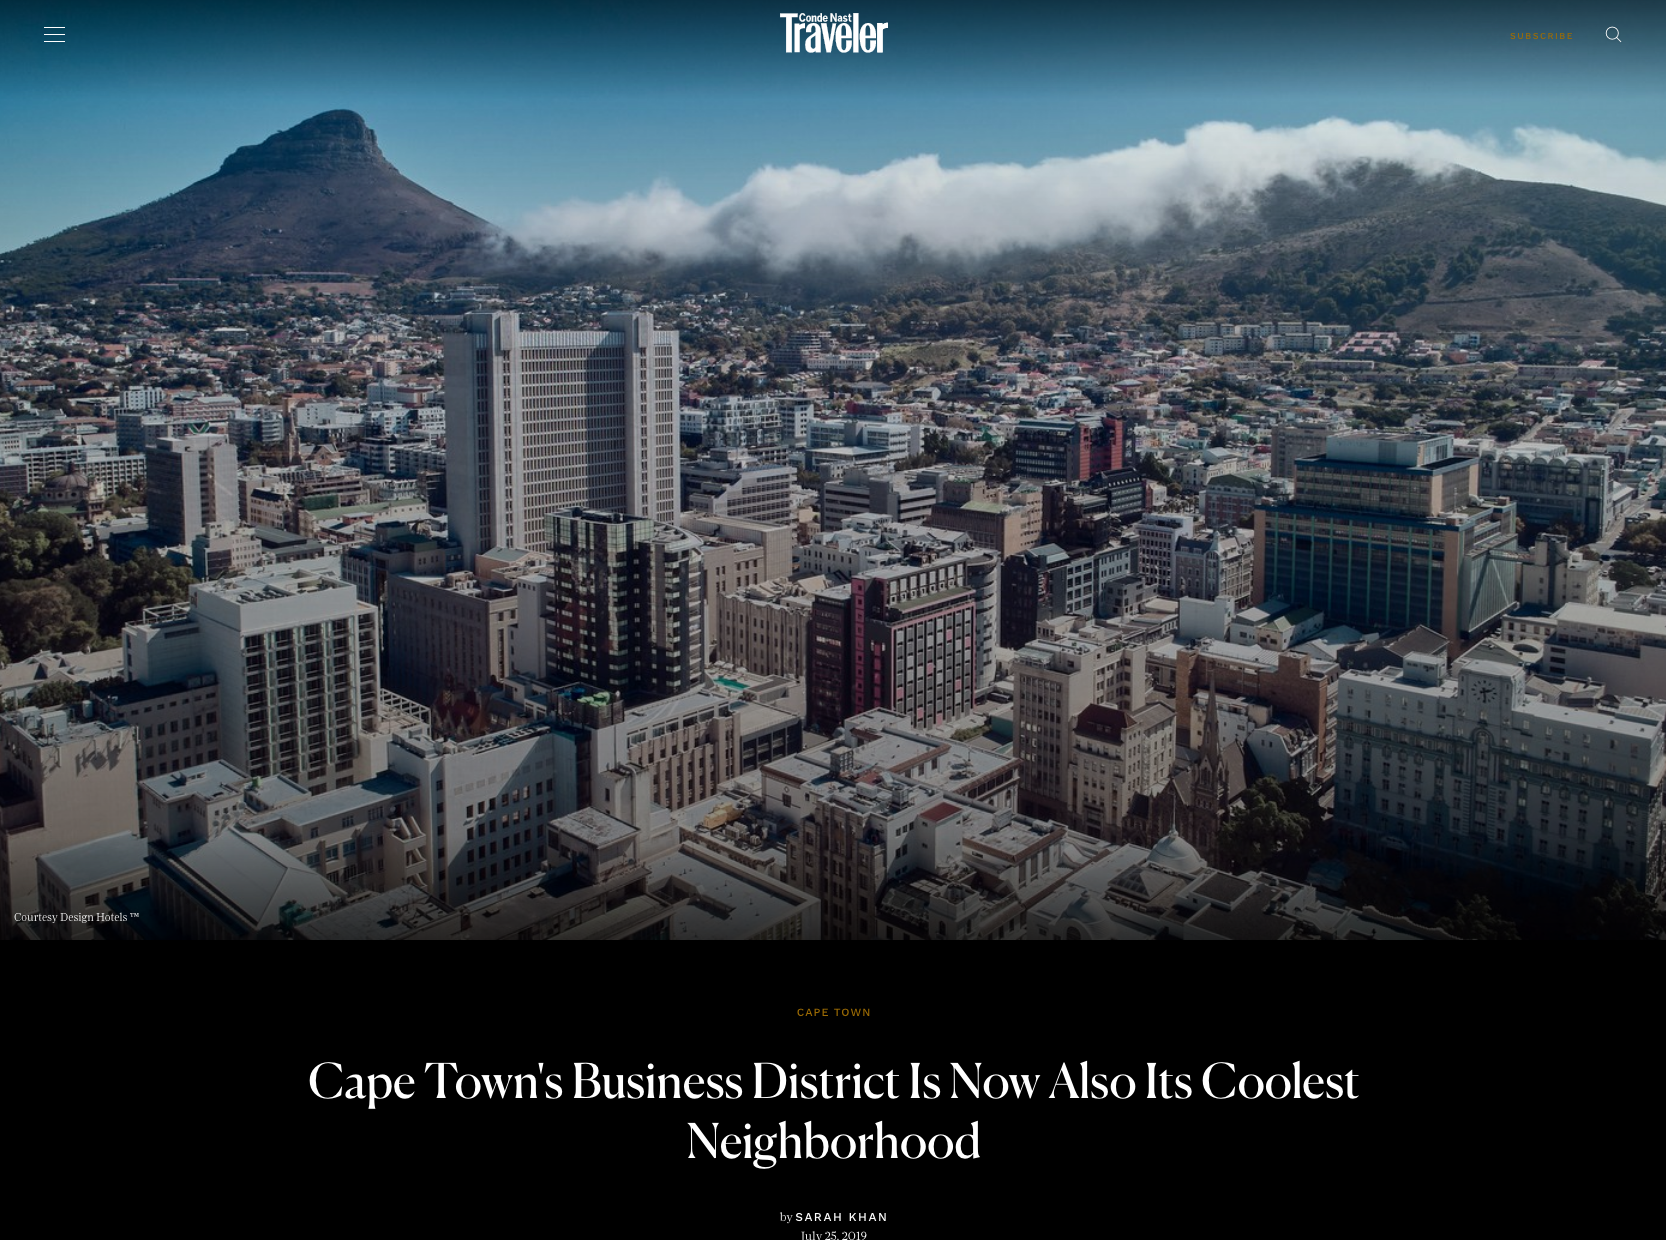 Condé Nast Traveler: Cape Town’s Business District Is Now Also Its Coolest Neighborhood